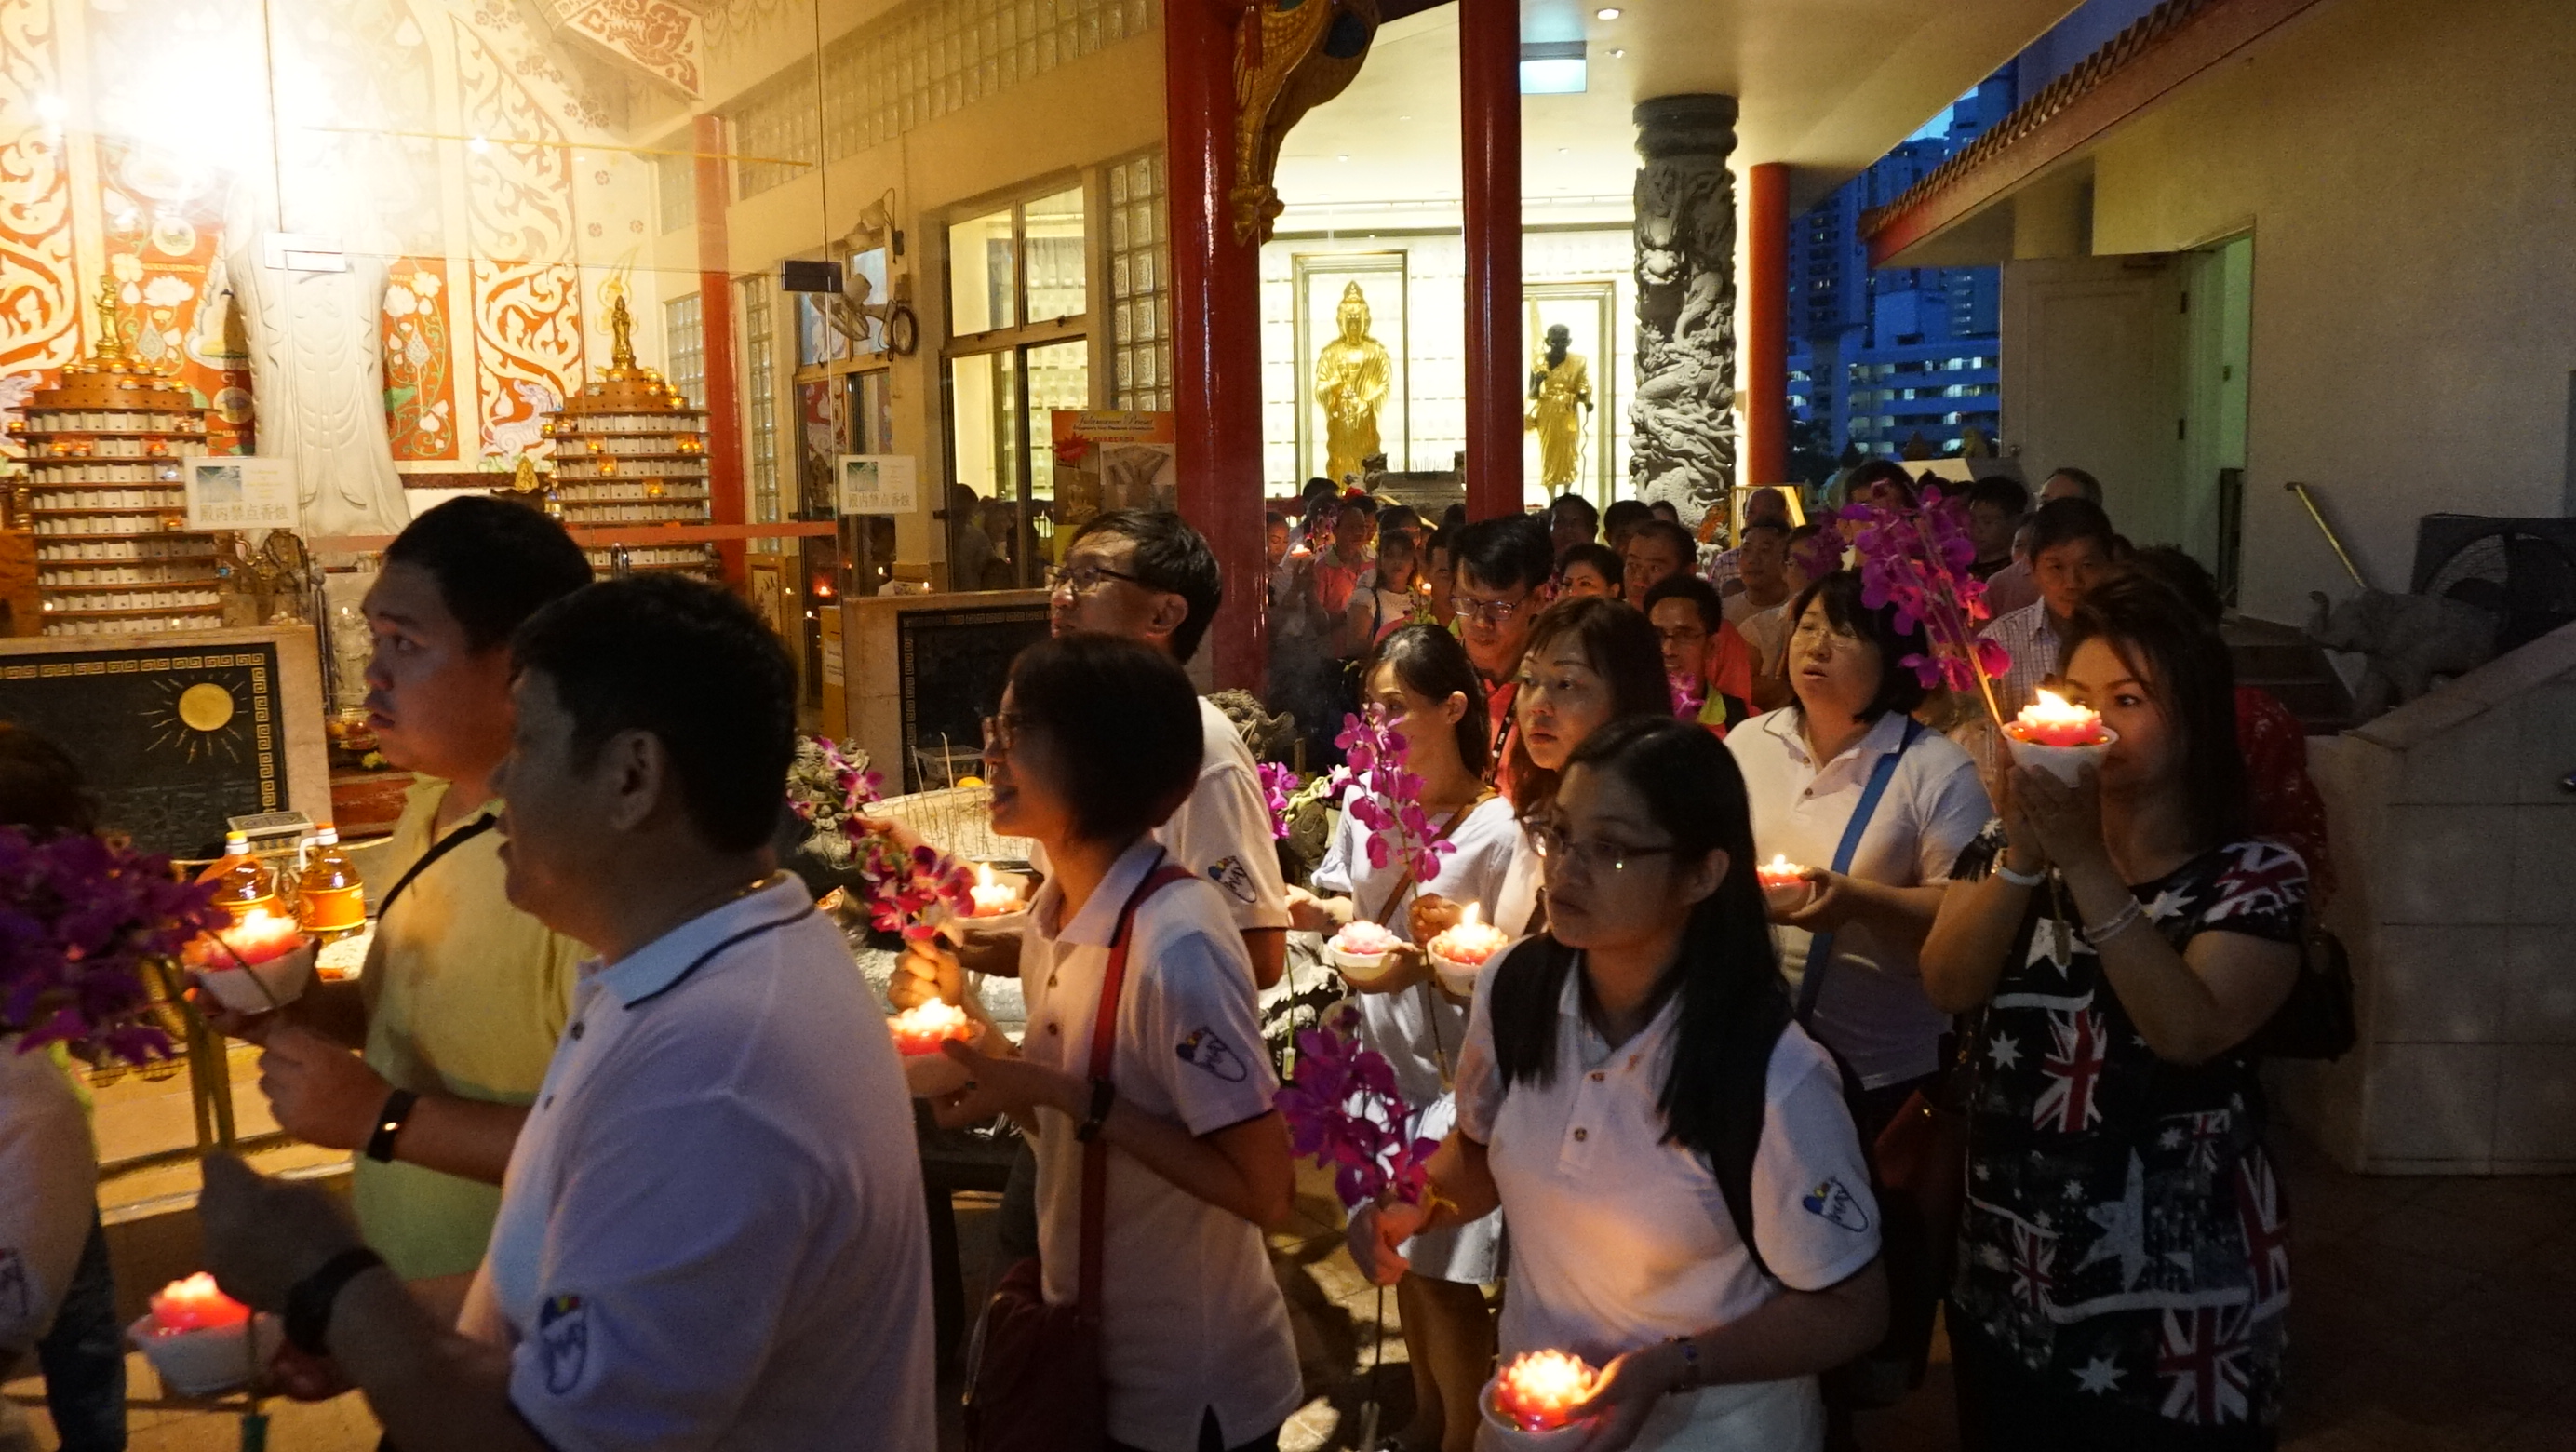 Devotees walking around the temple grounds with candles as part of Vesak Day rituals.